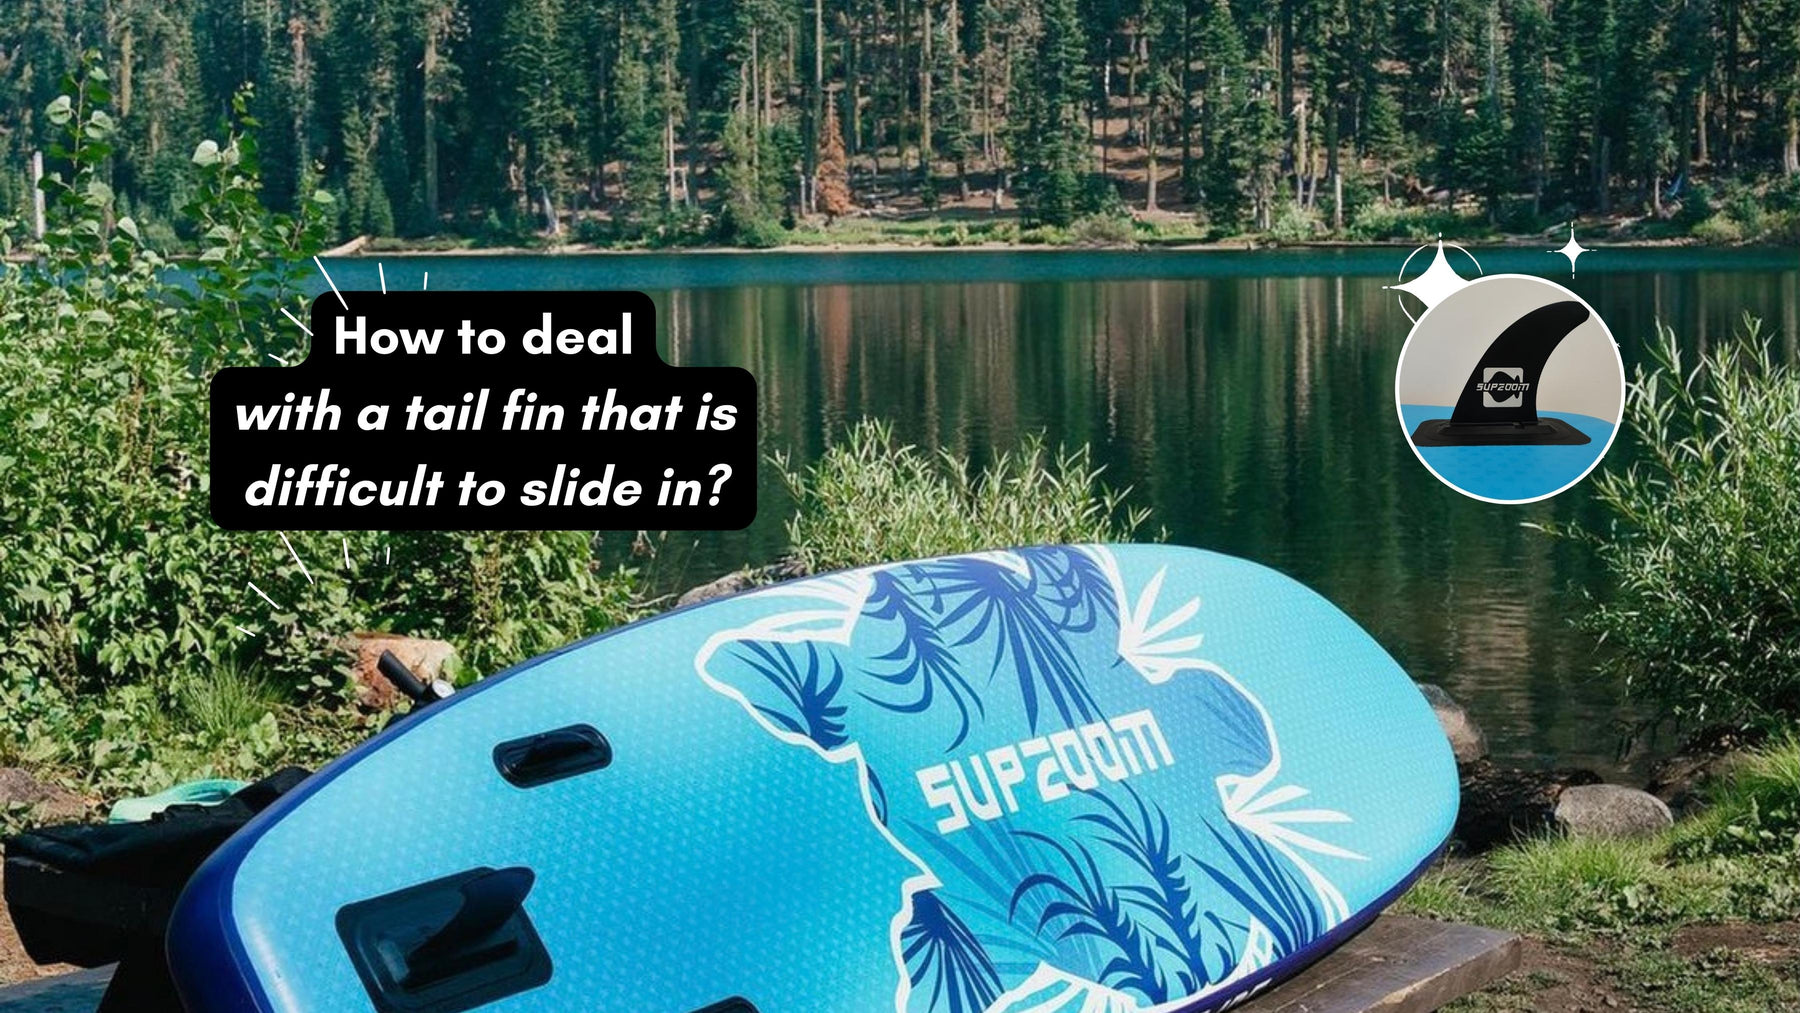 How to Deal with a Tail Fin that is Difficult to Slide in